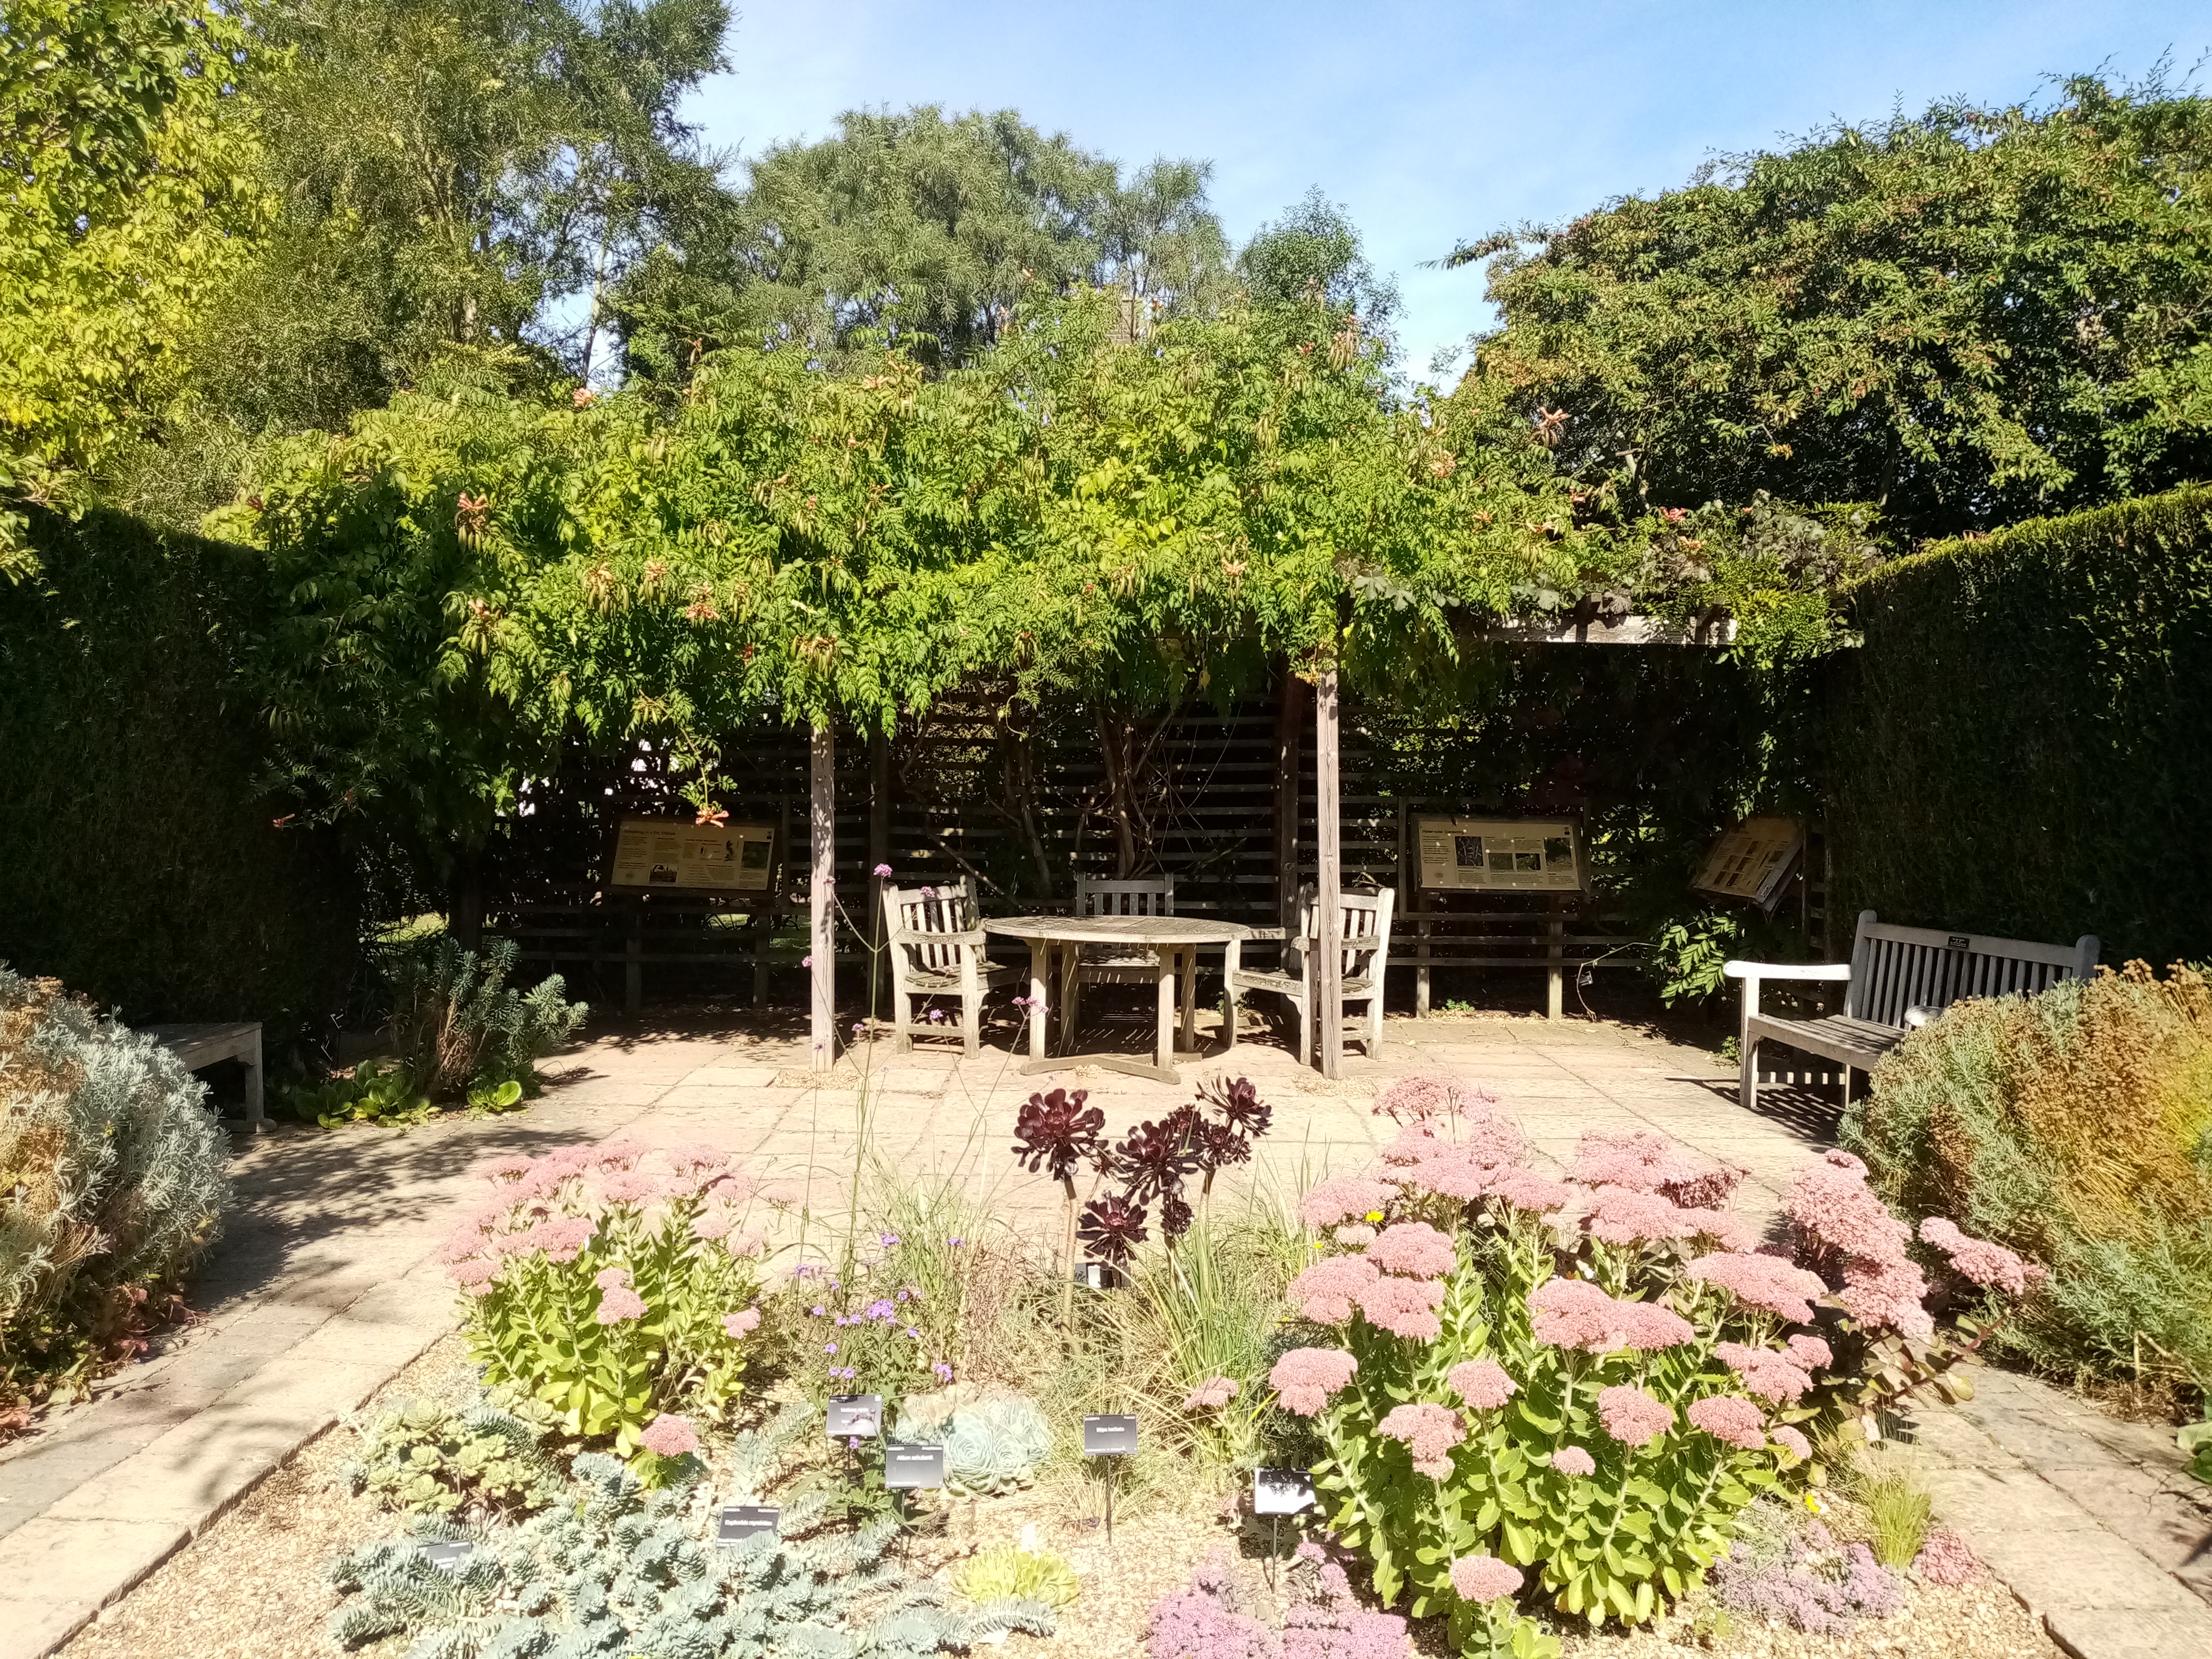 There is a bed of flowers, pink on the left and right and darker red/brown plants in the middle. There is a wooden bench on the right and a circular wooden table with 3 wooden chairs in the centre back. There is a hedge surrounding the Dry Garden.